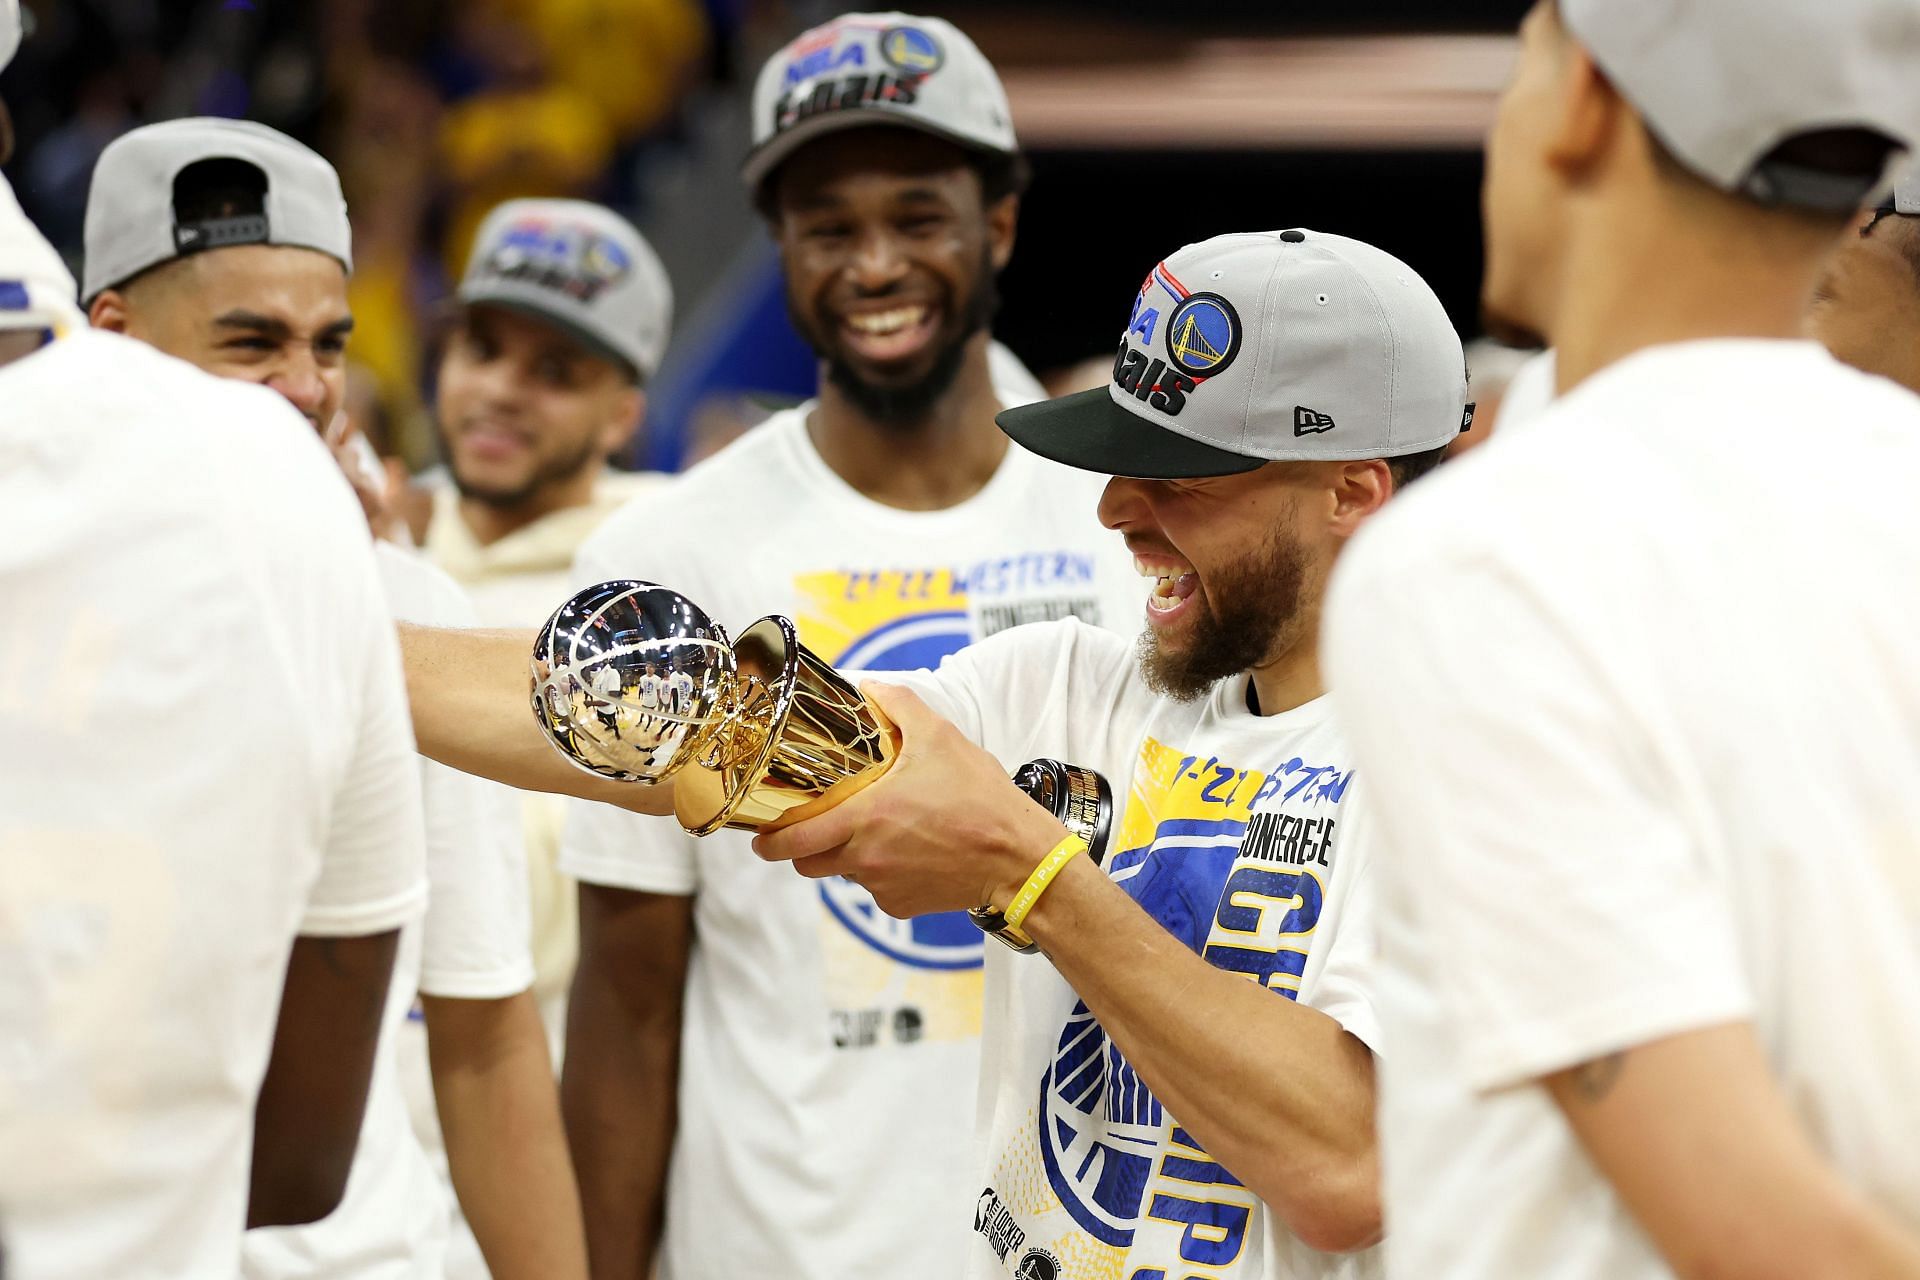 The Warriors could win multiple championships thanks to Steph Curry and the depth.